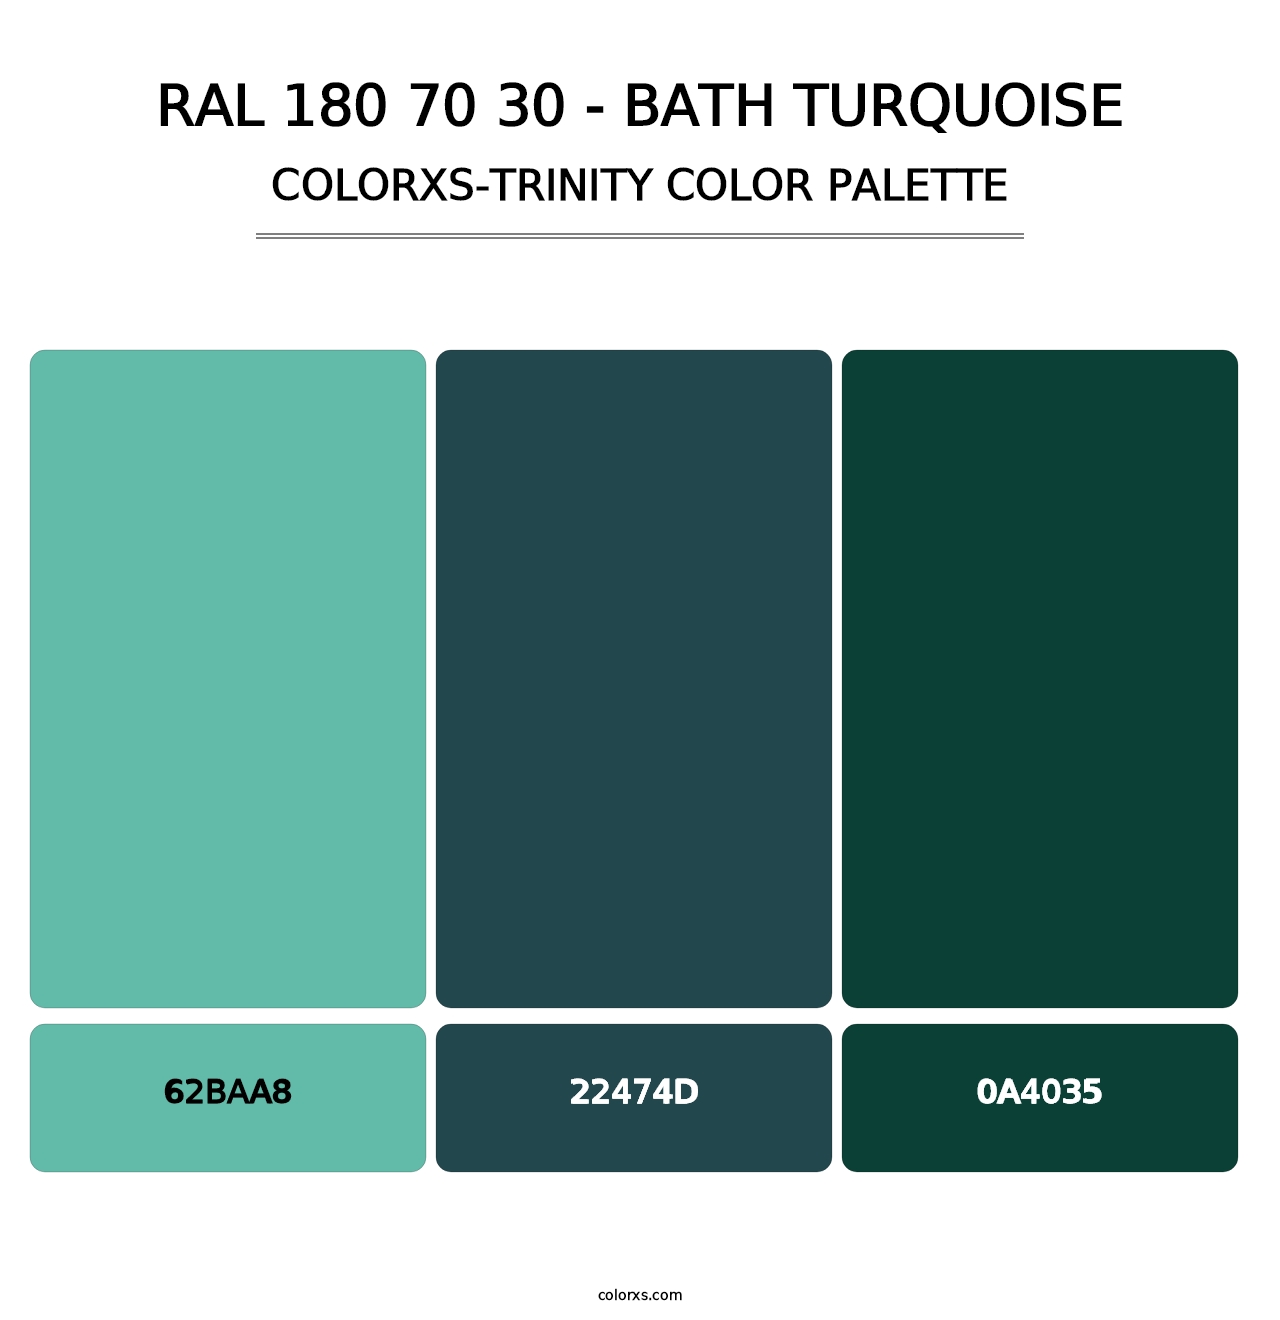 RAL 180 70 30 - Bath Turquoise - Colorxs Trinity Palette